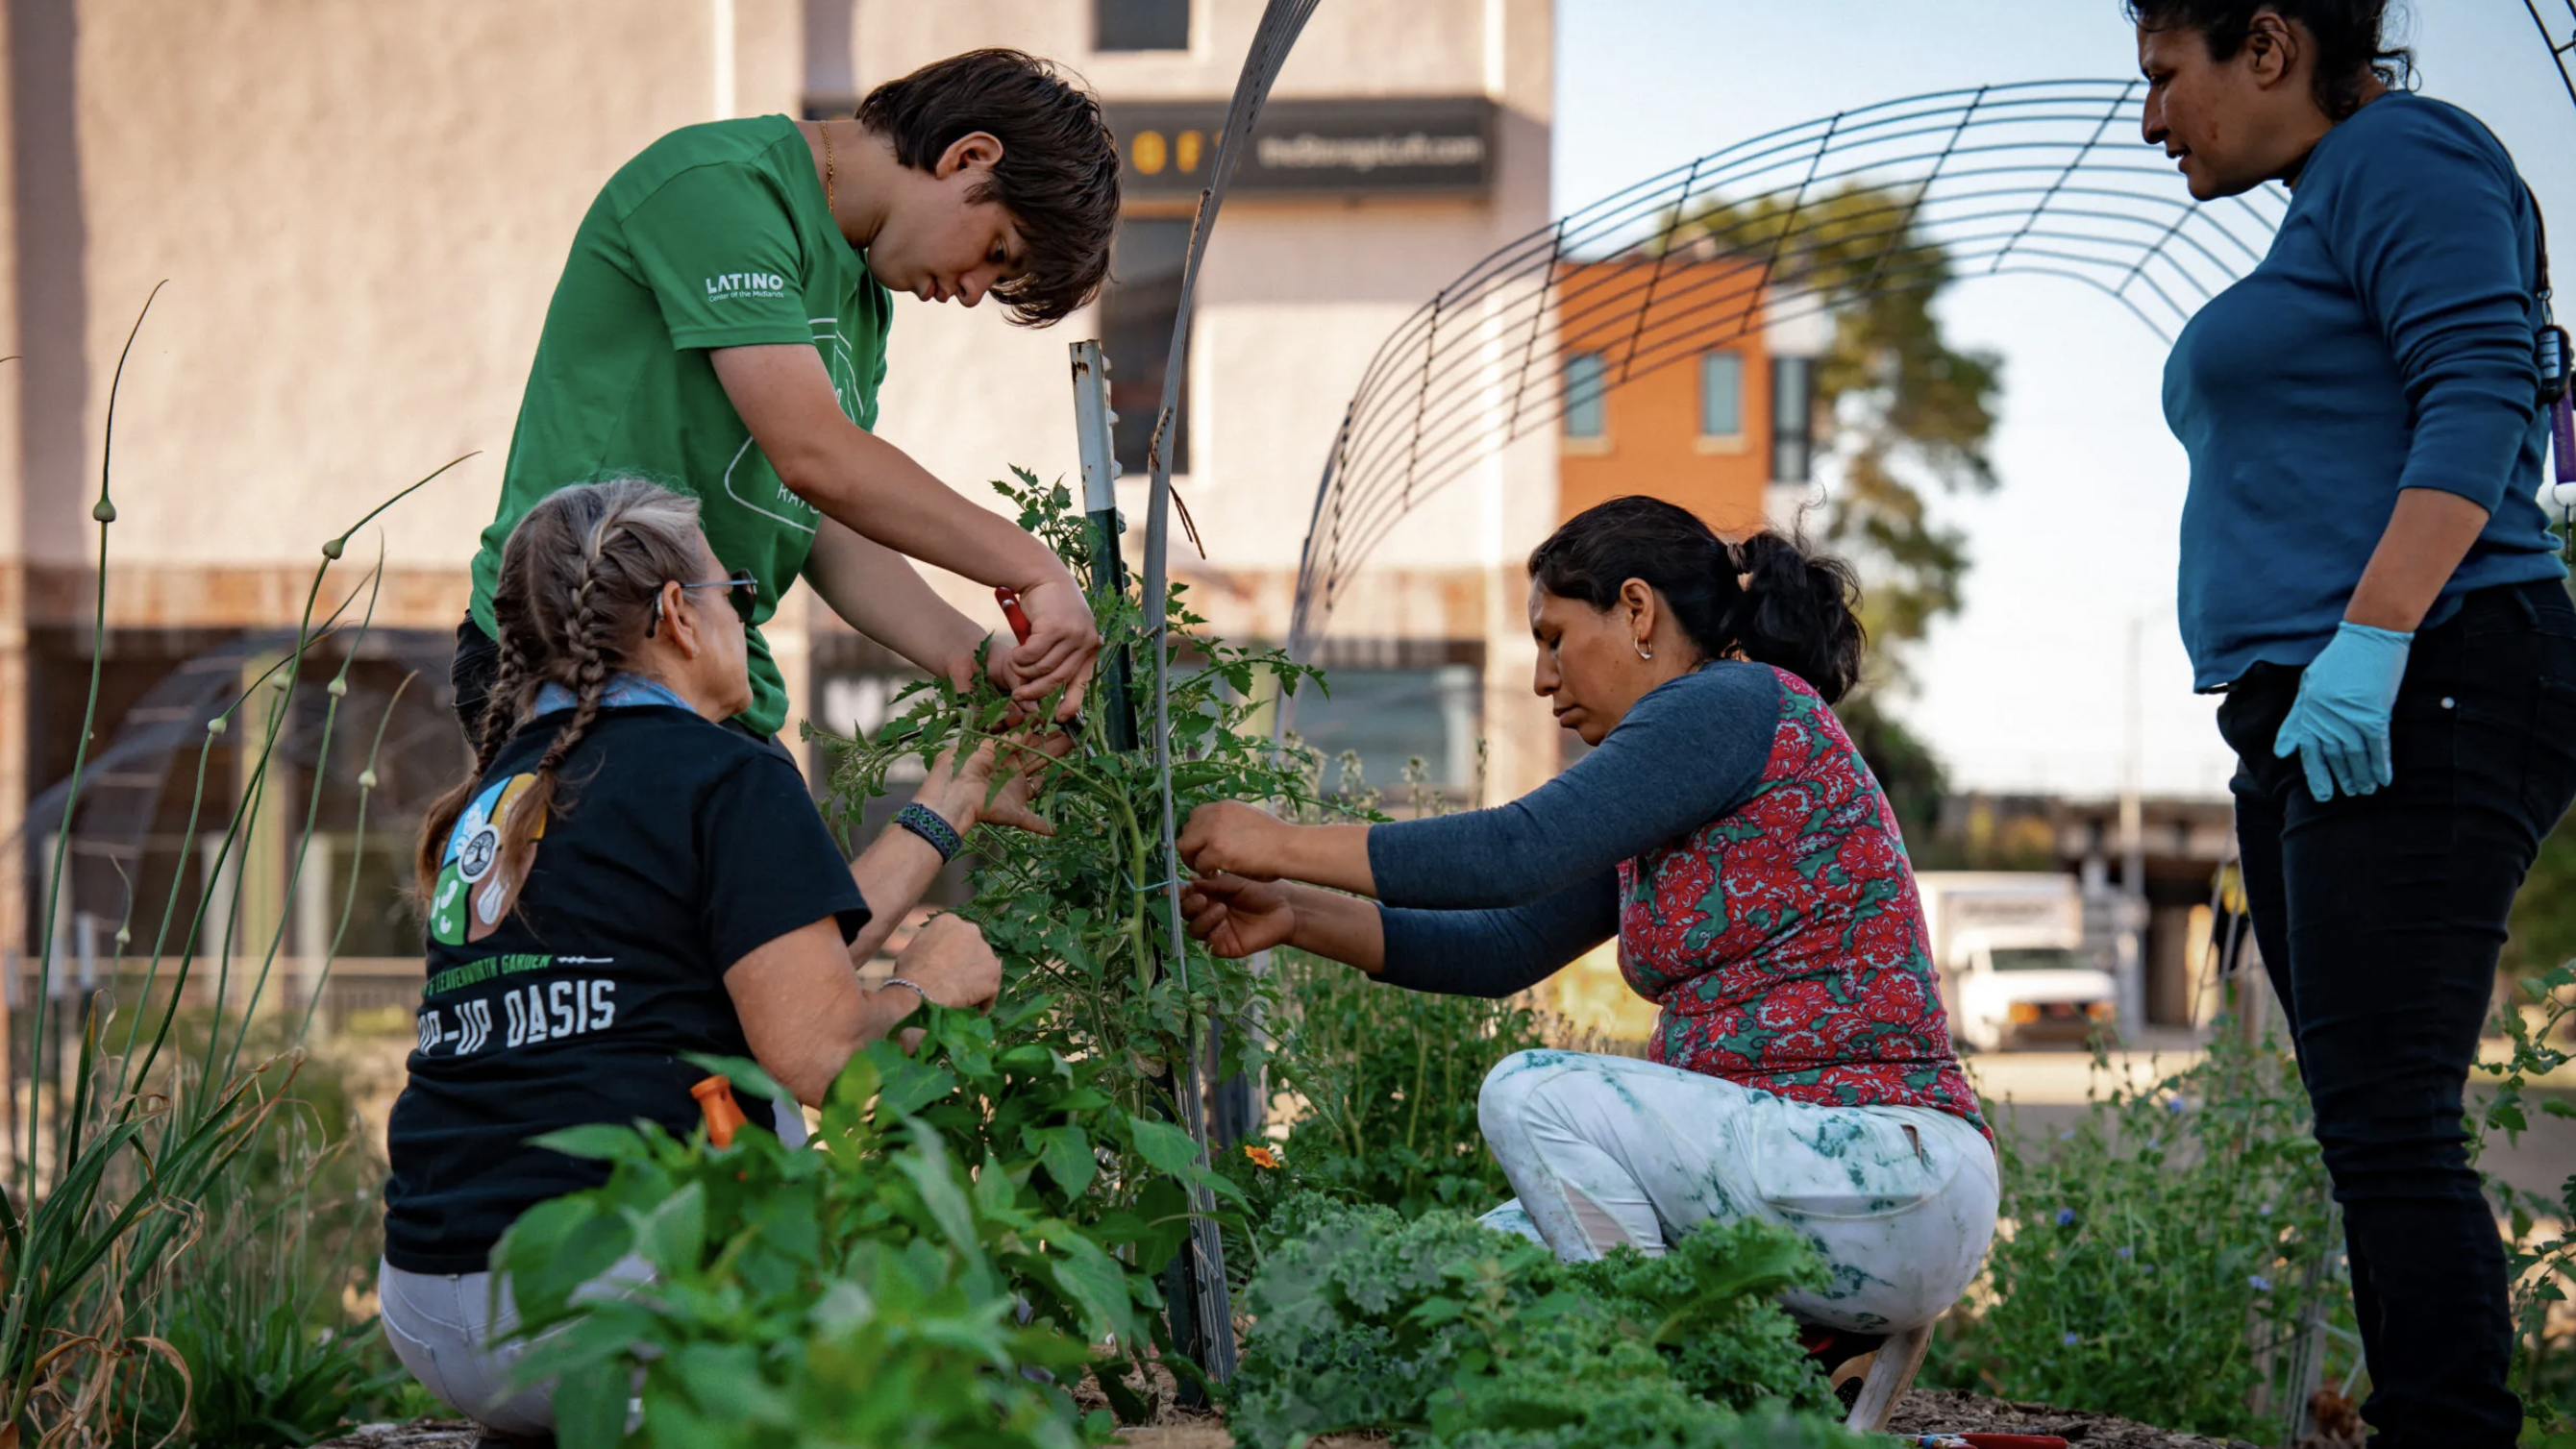 ‘NATURALLY IN OUR DNA’: COMMUNITY GARDENS AND URBAN FARMS SPREAD THROUGH OMAHA